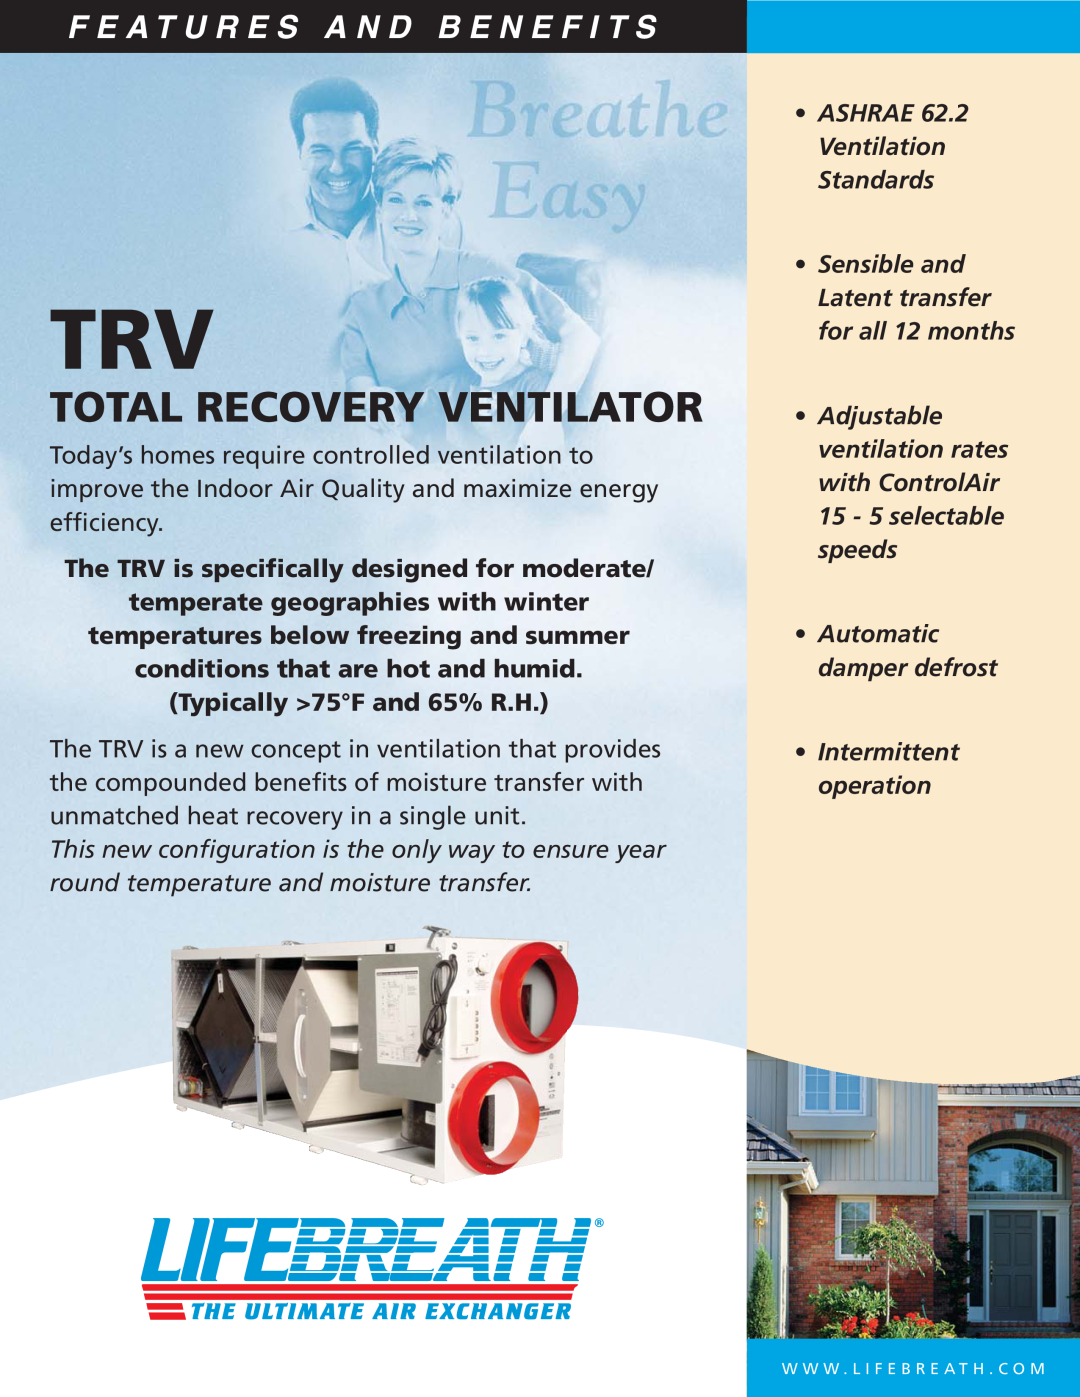 Lifebreath 300TRV manual Total Recovery Ventilator, F E A T U R E S A N D B E N E F I T S, Typically 75F and 65% R.H 